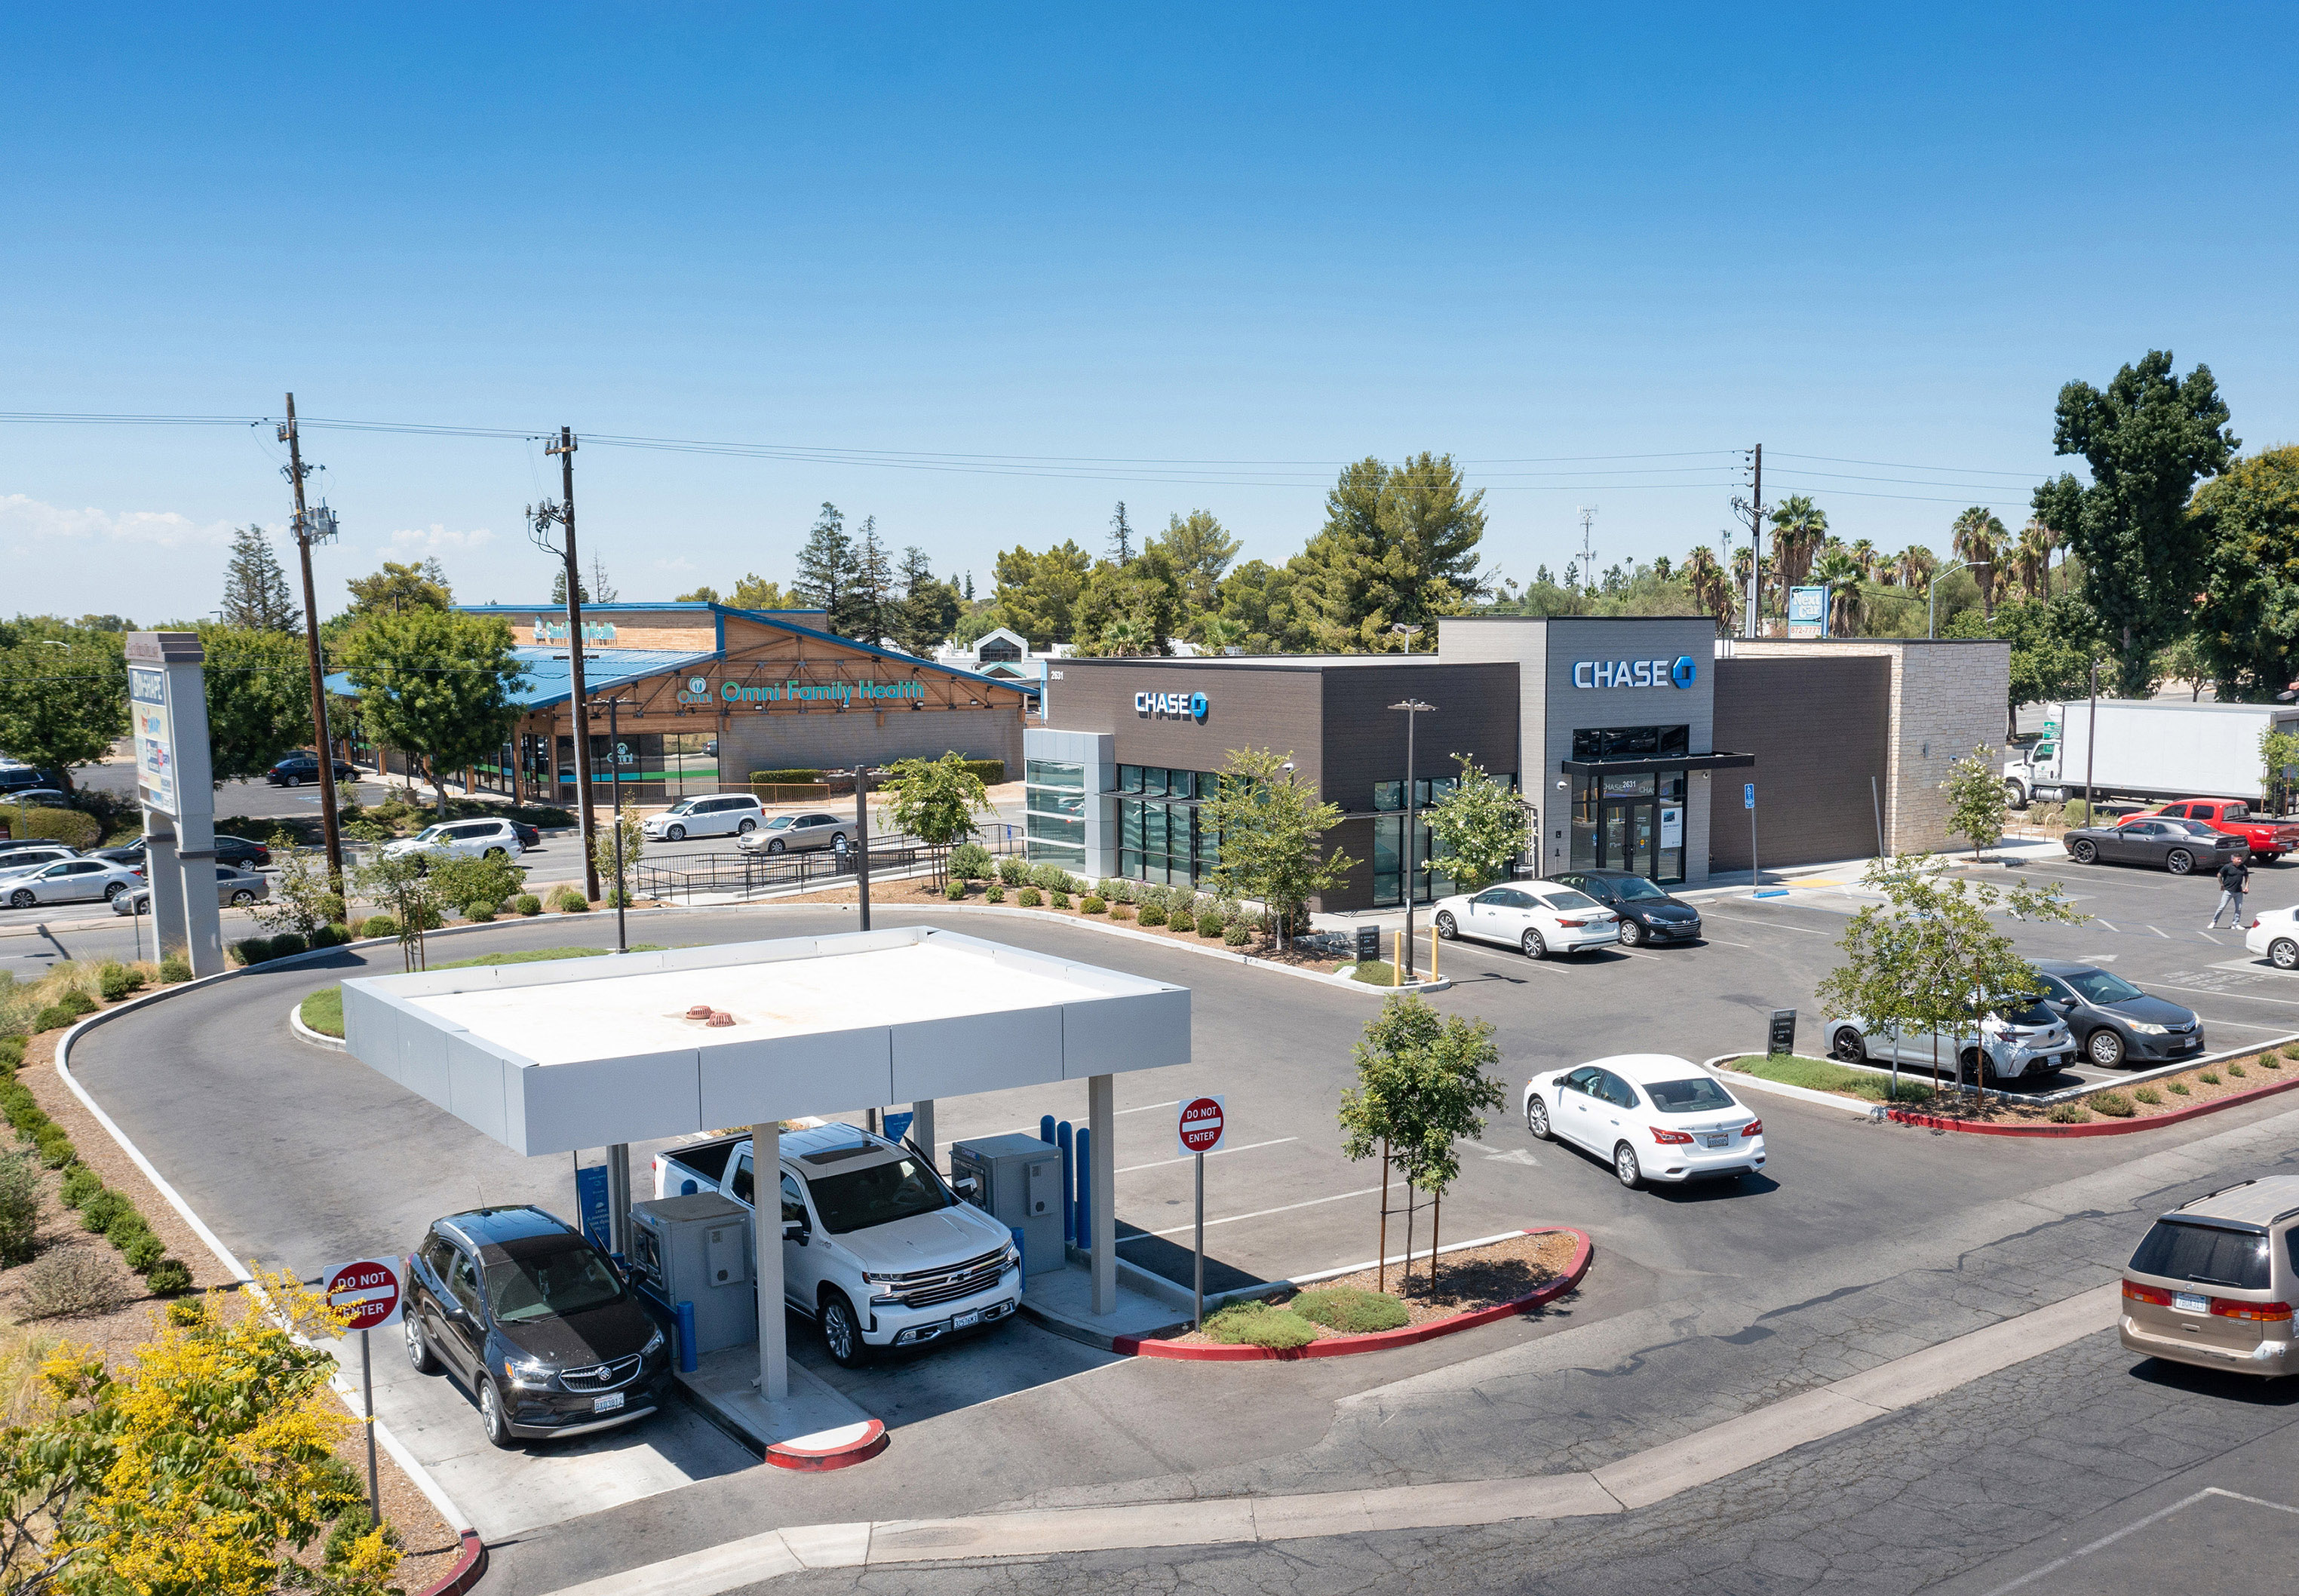 New Construction Chase Bank Ground Lease Sells in Bakersfield, Calif., for $2.93 Million